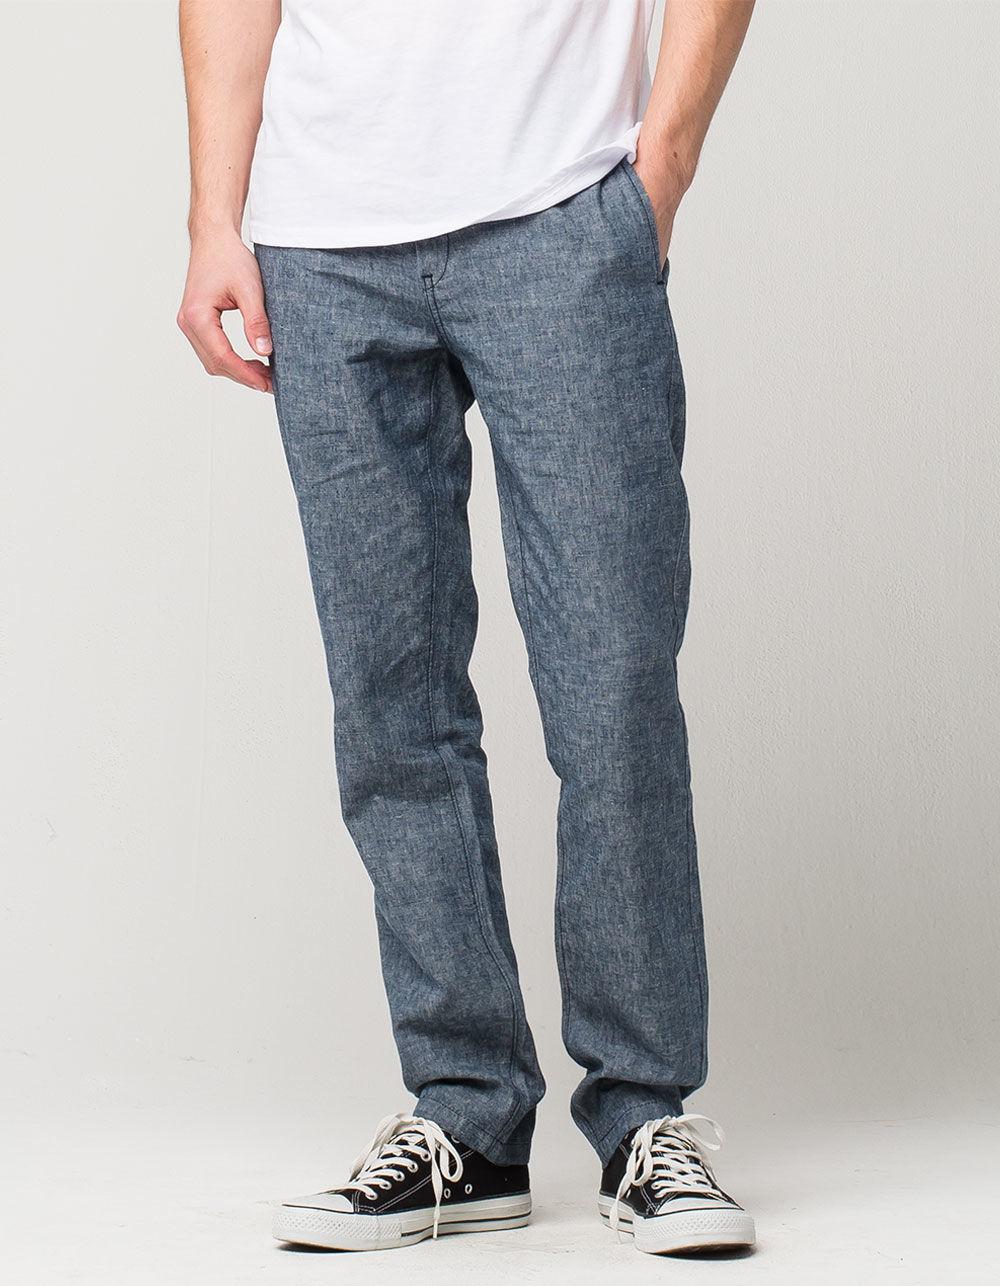 Levi's Linen 511 Chambray Mens Slim Chino Pants in Blue for Men - Lyst